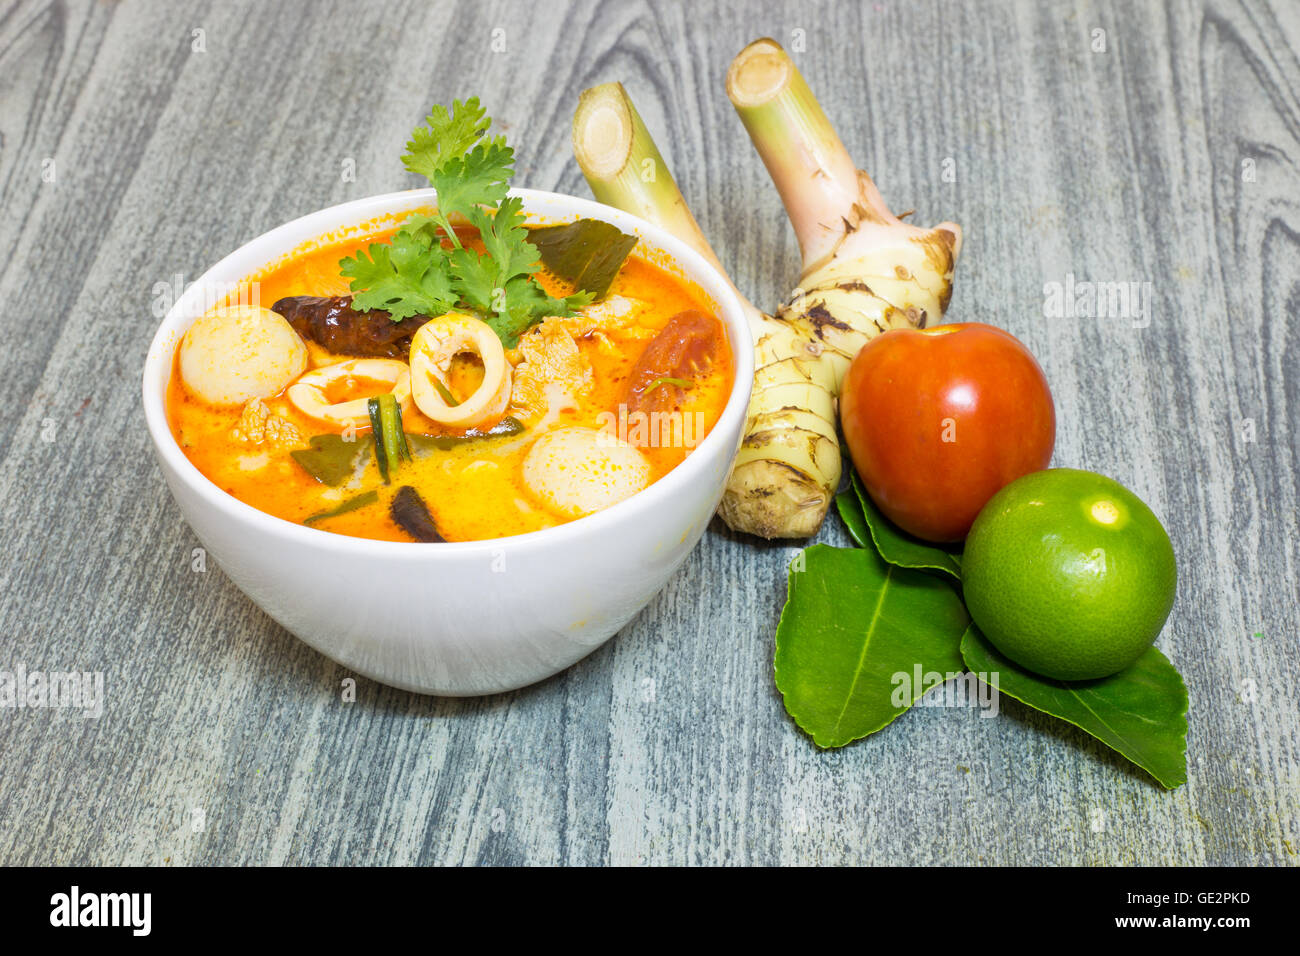 Tom Yum Kung-Thai spicy soup with Herb set of Tom Yum Soup Ingredients on wood background Stock Photo